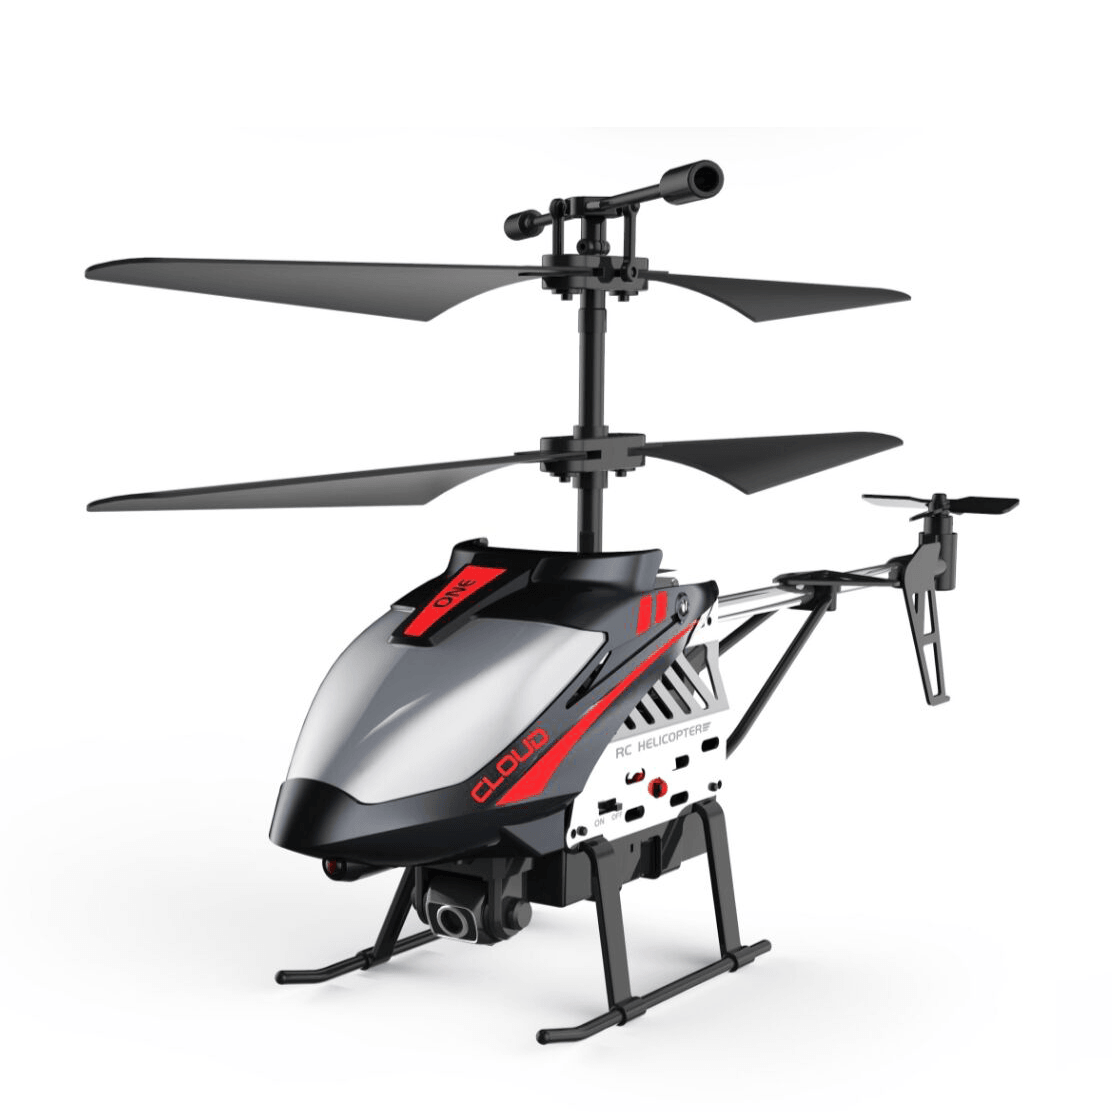 2.4G 4CH Sky Max RC Flying Helicopter with Camera and Lights - Sterilamo